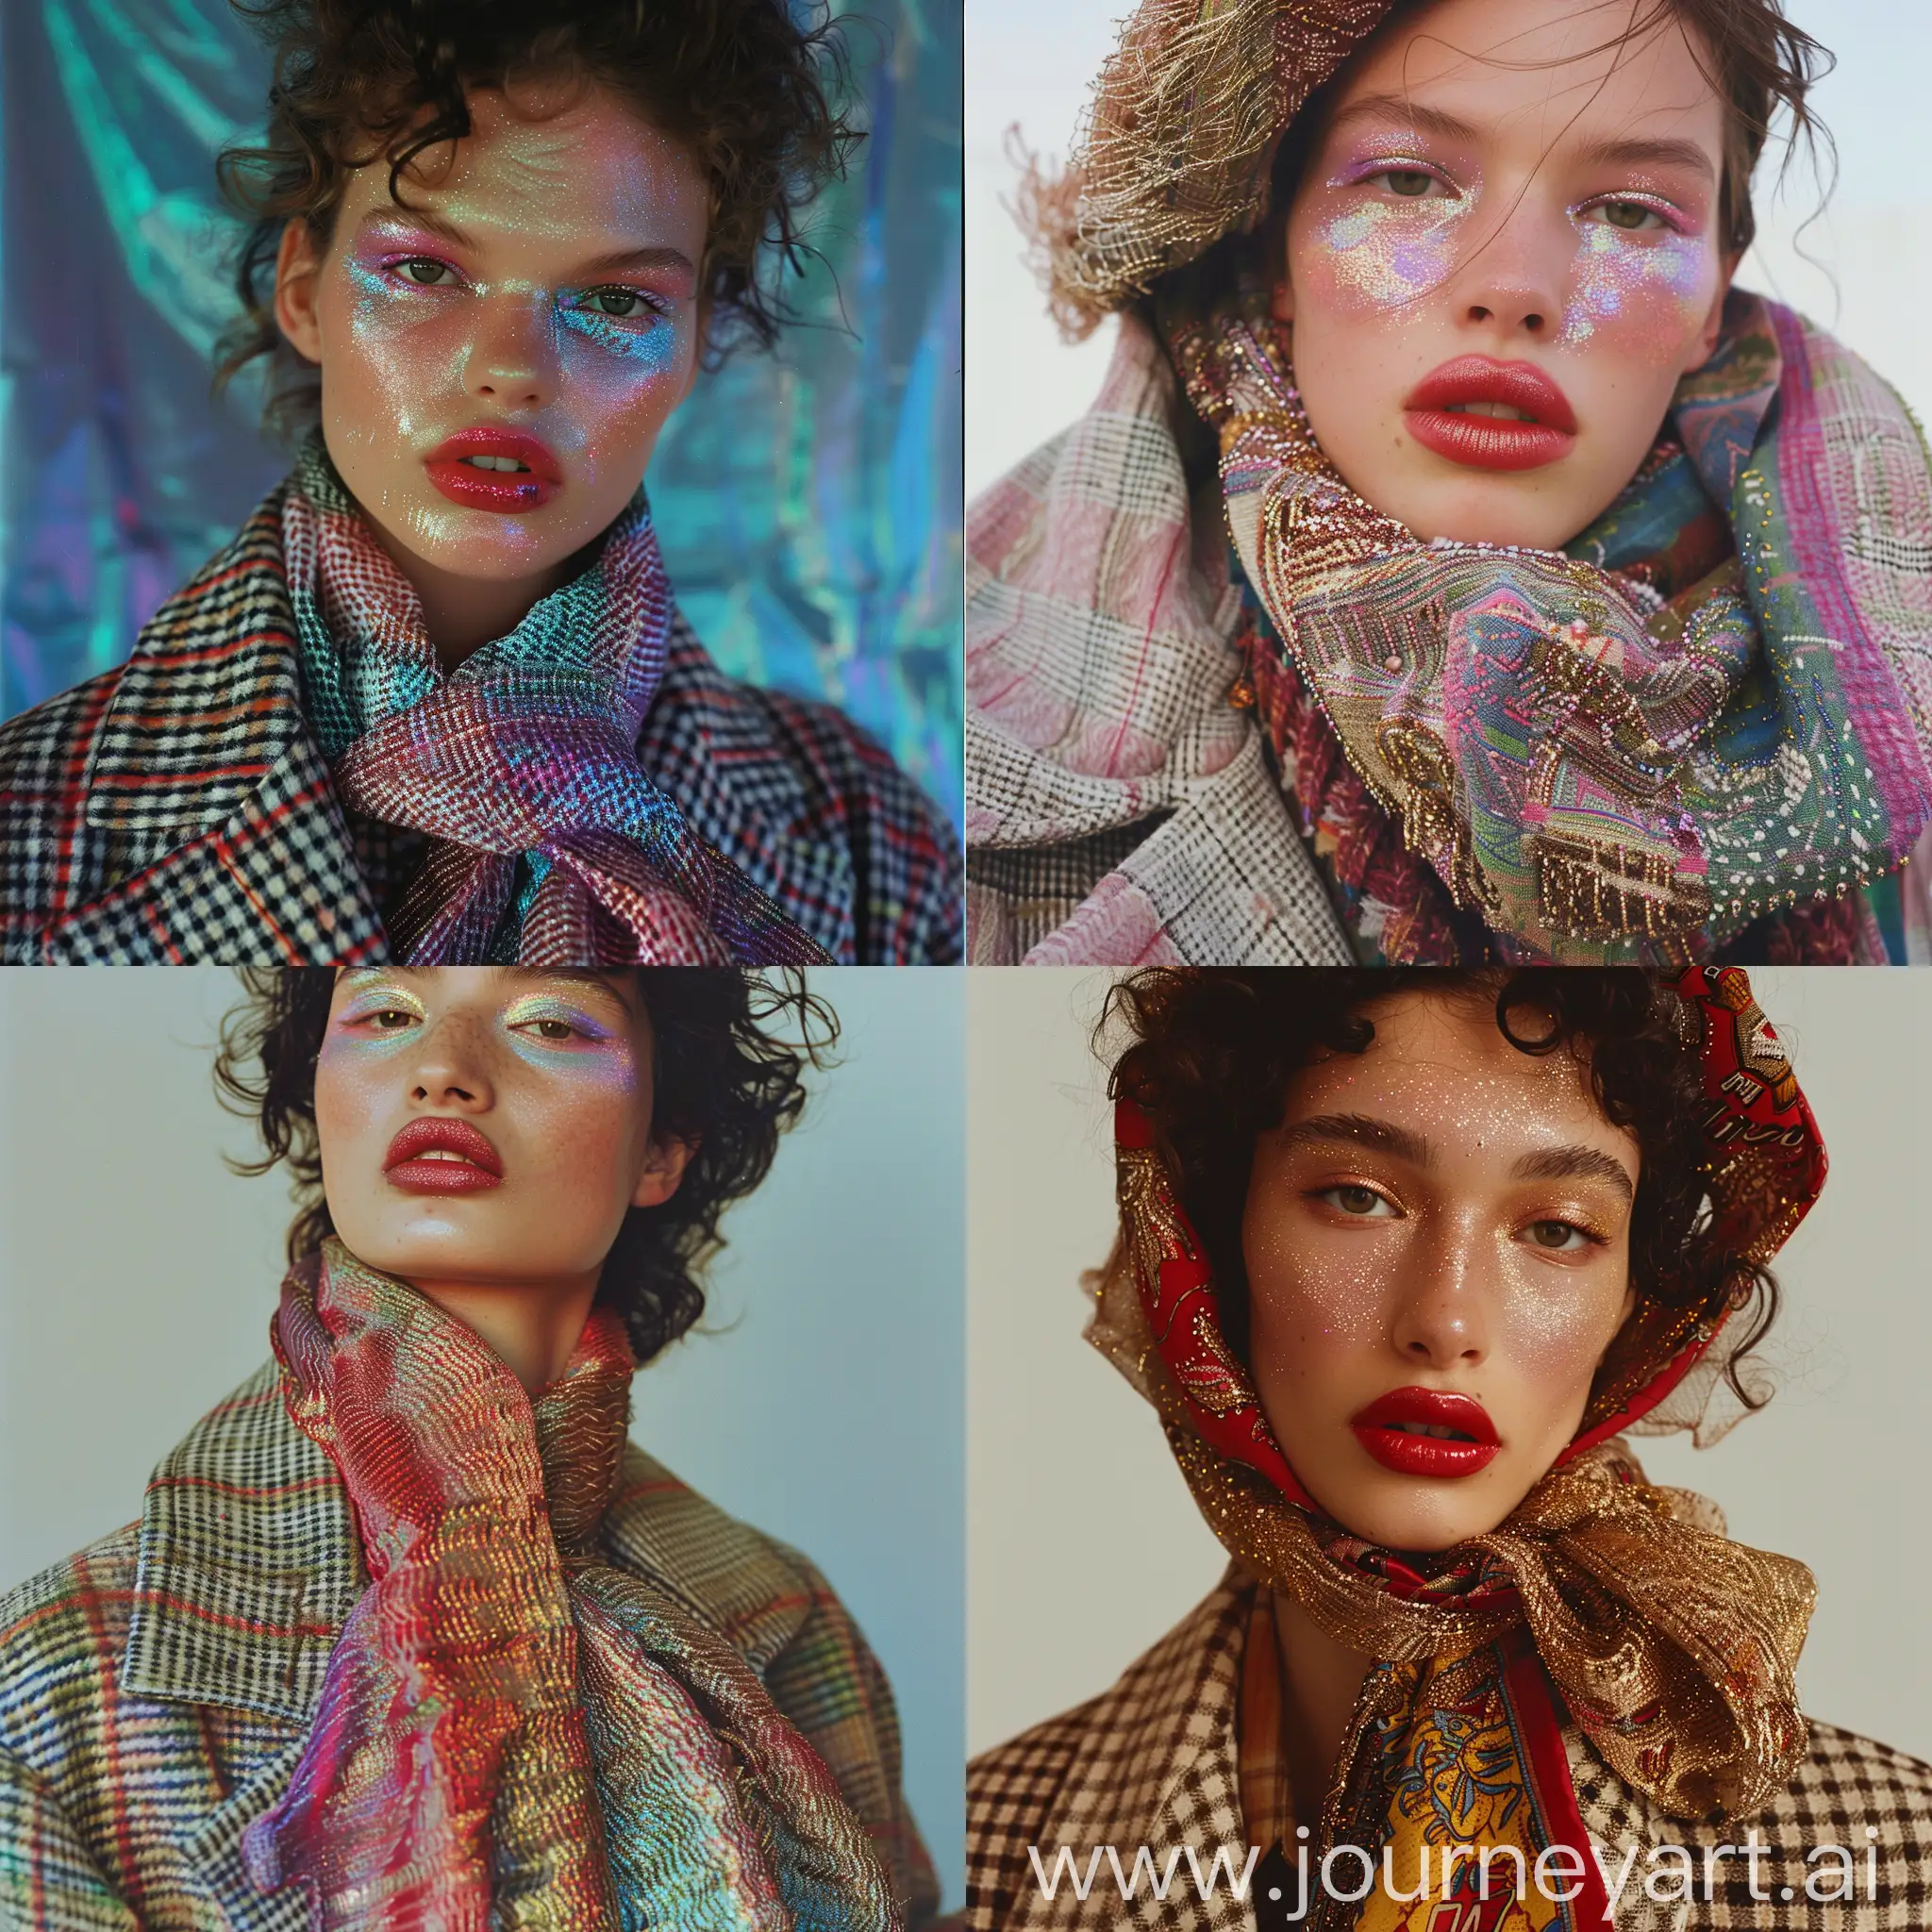 90s-Turkish-Model-in-Preppy-Style-with-Checked-Coat-and-Iridescent-Makeup